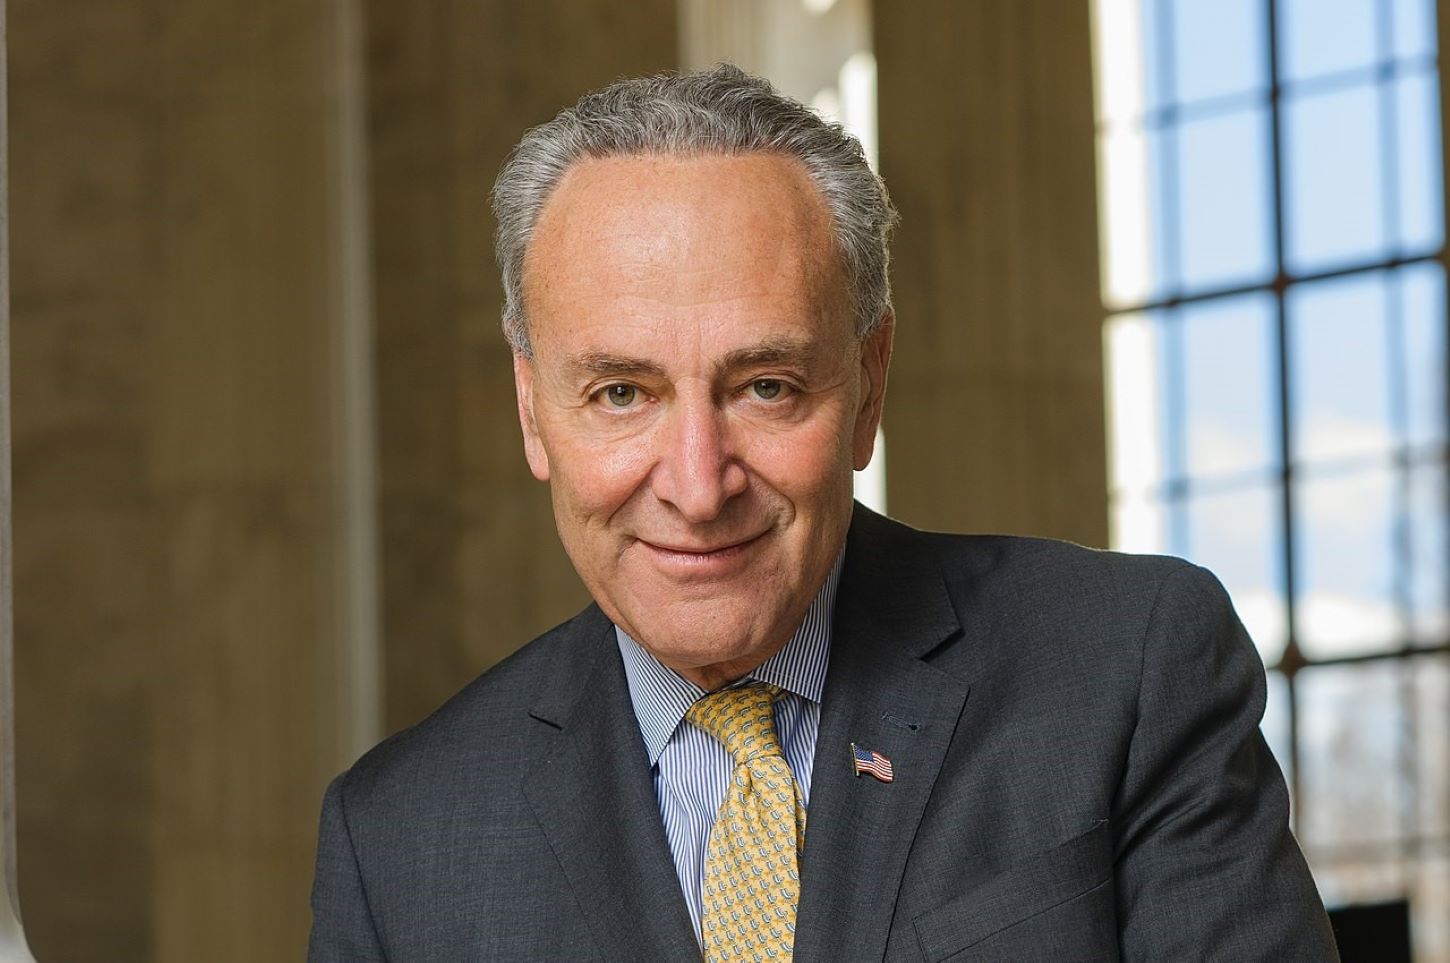 Schumer responds to White Nationalism comments from AL Sen.